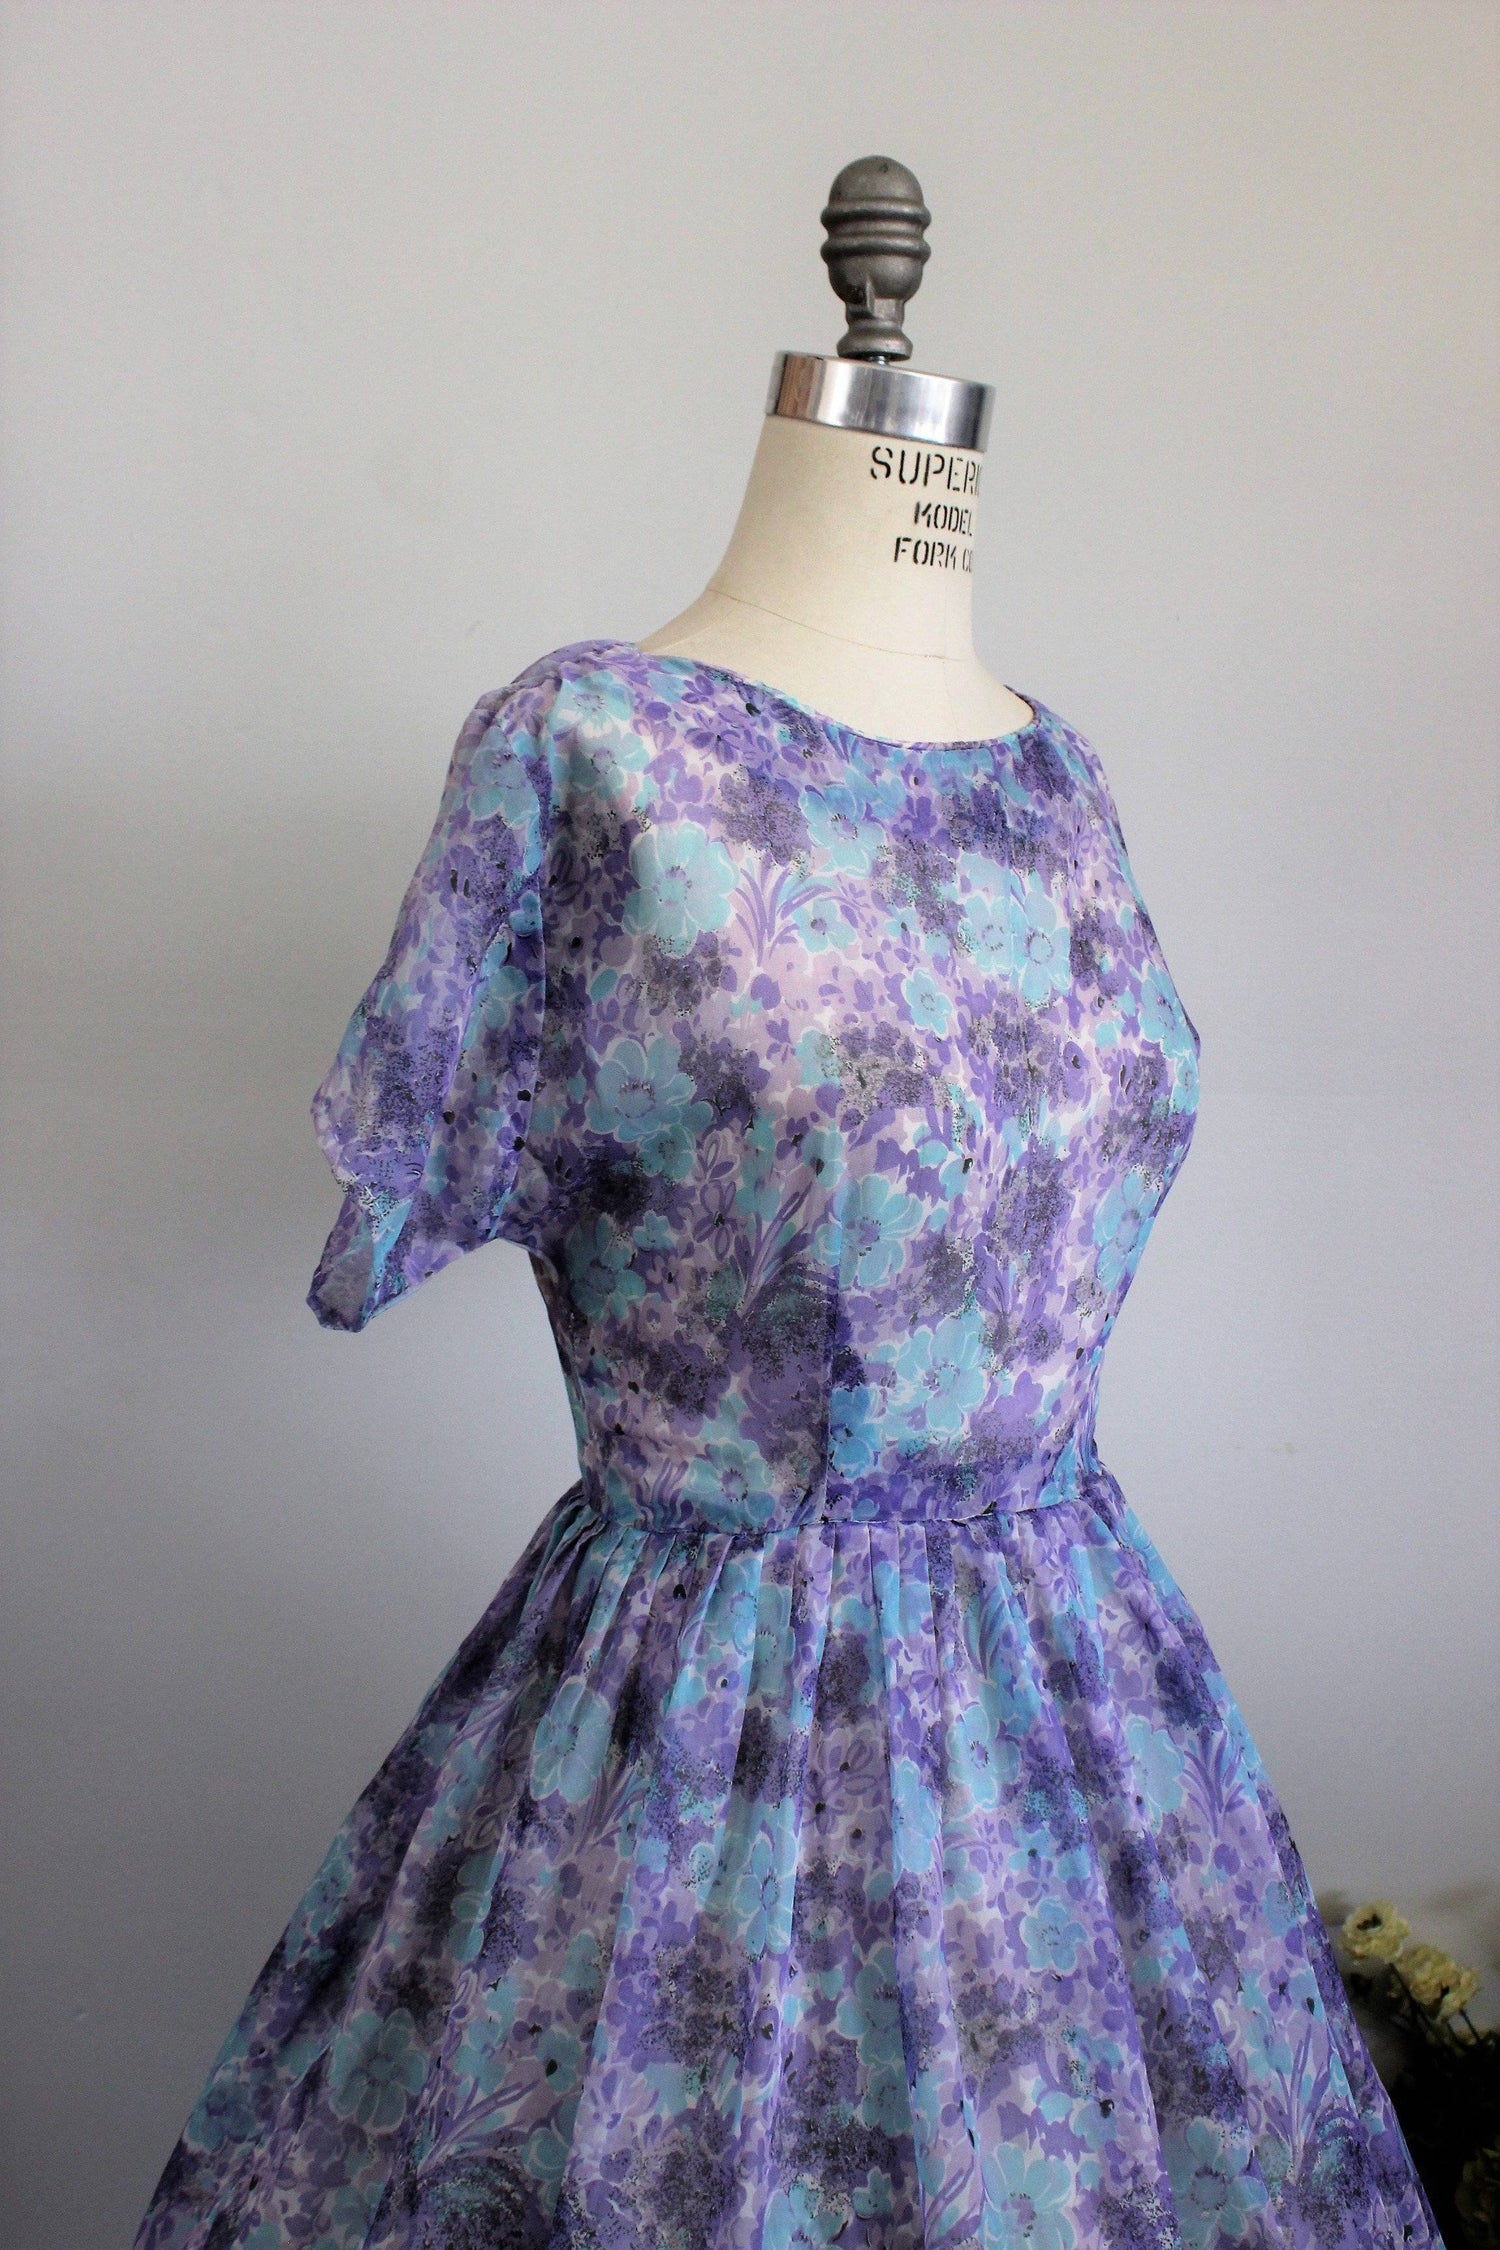 Vintage 1950s Blue and Purple Floral Print New Look Dress, Sheer Nylon ...